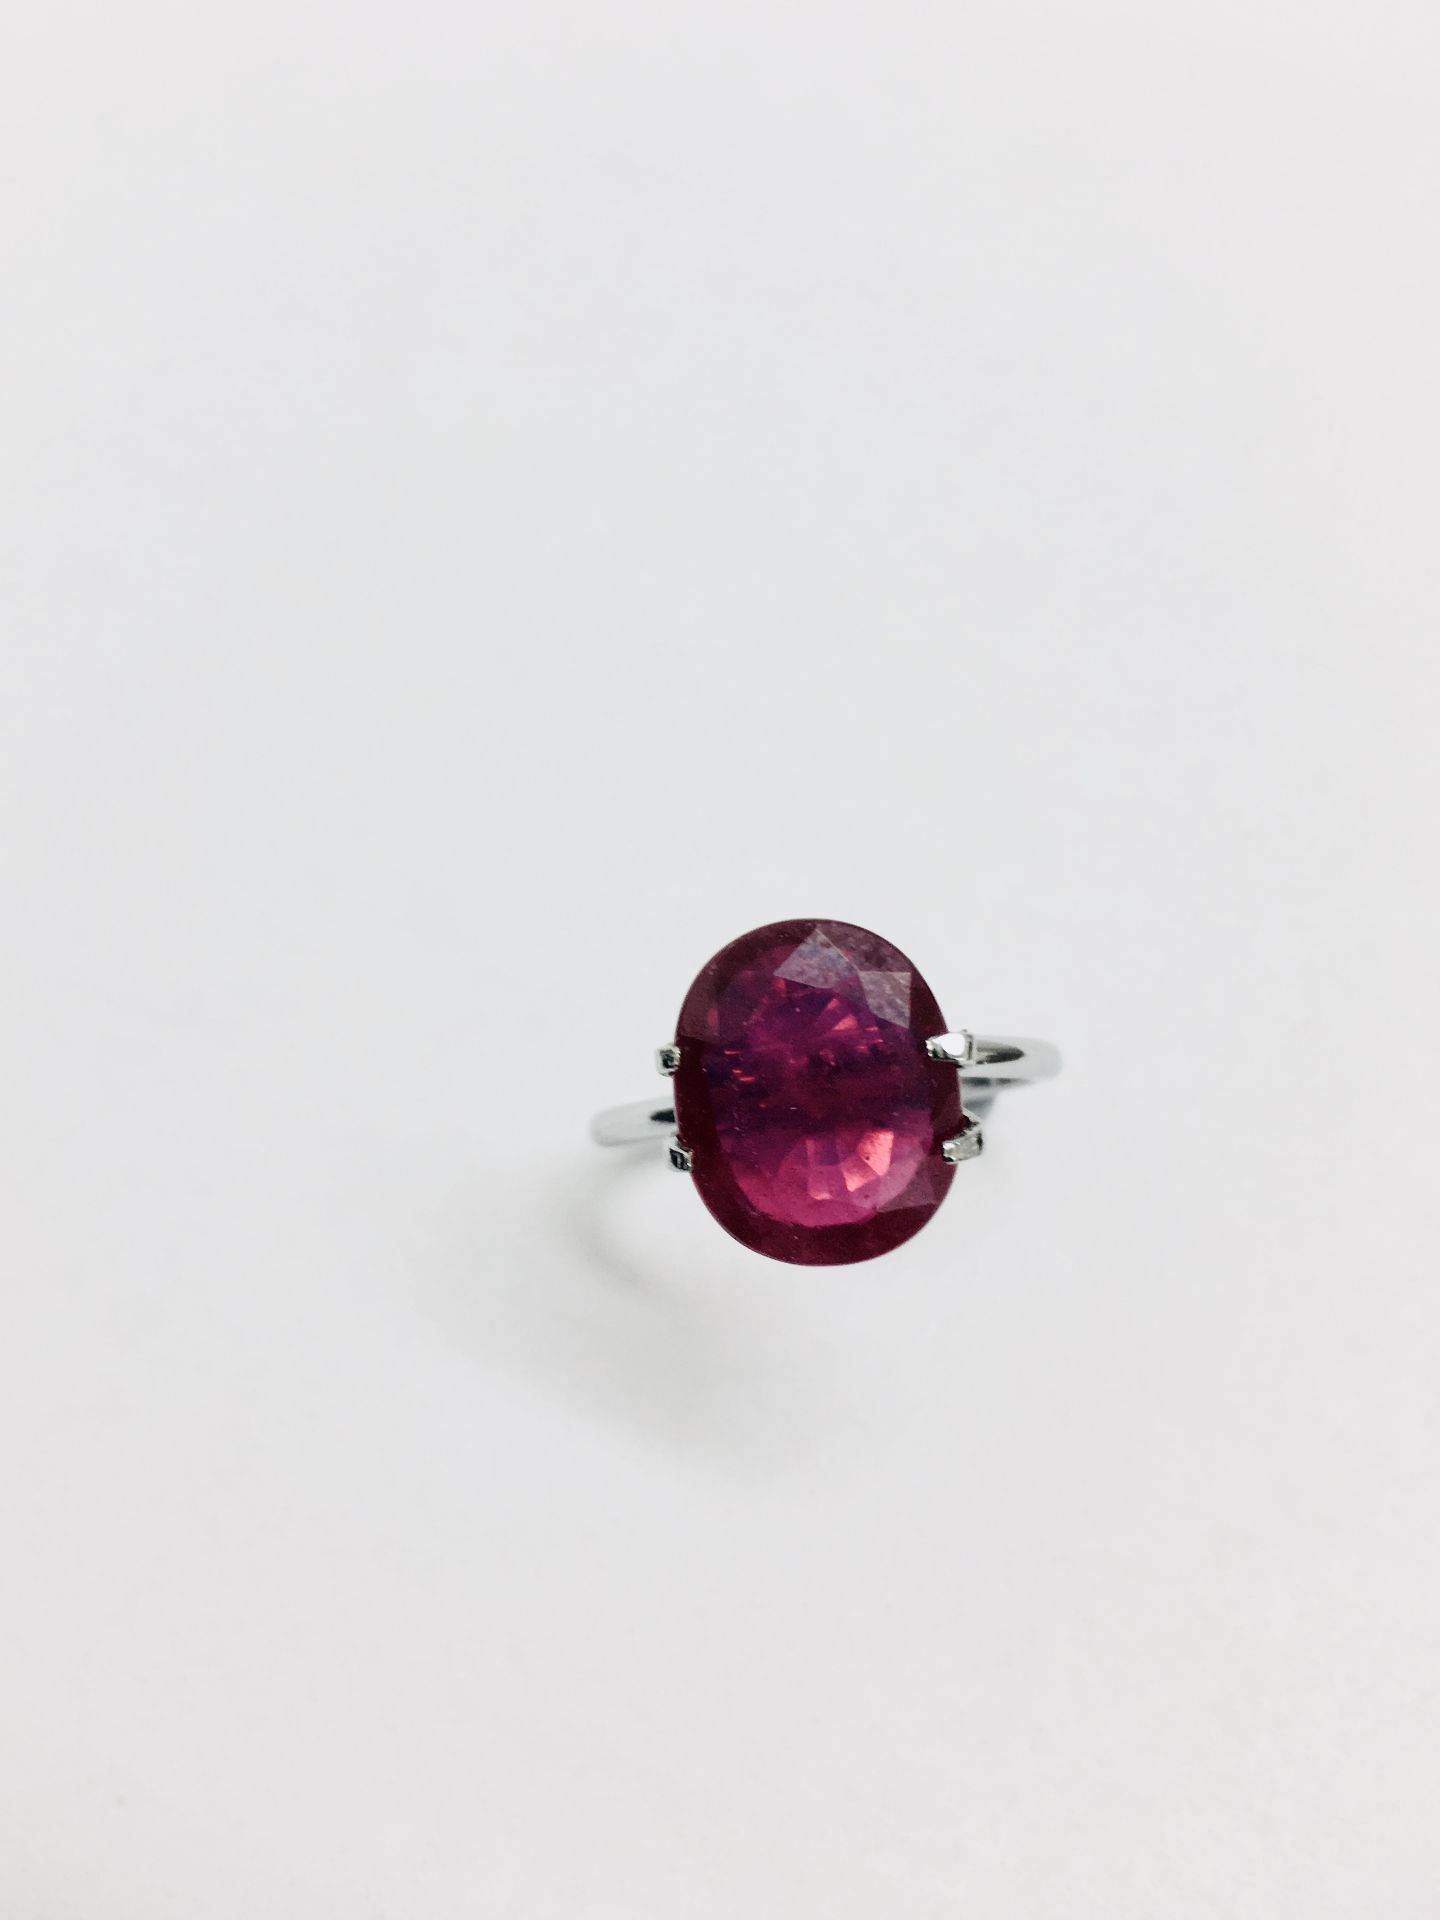 4.02ct ruby,Enhanced by Frature,good clarity and colour,12mmx10mm ,valued at 800 - Image 3 of 3